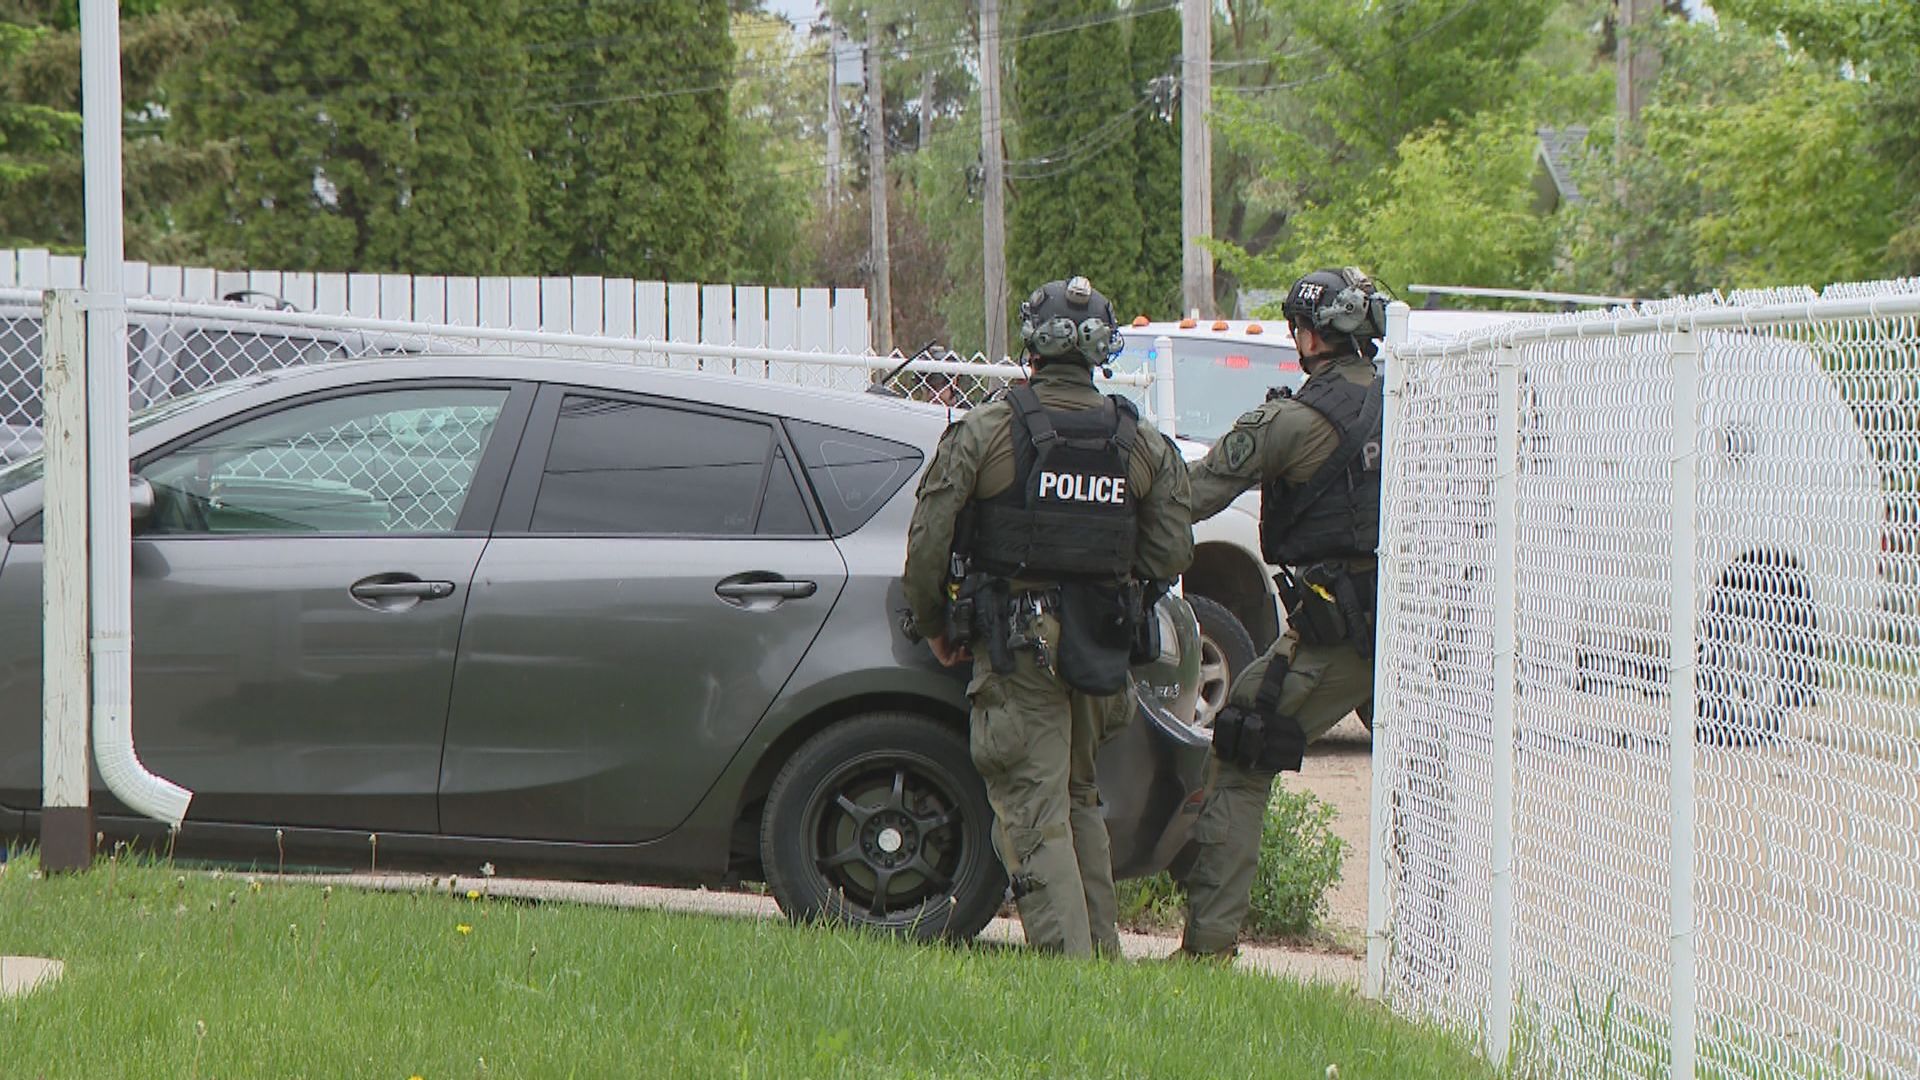 Man charged with threatening lives of officers during stand-off: Saskatoon police